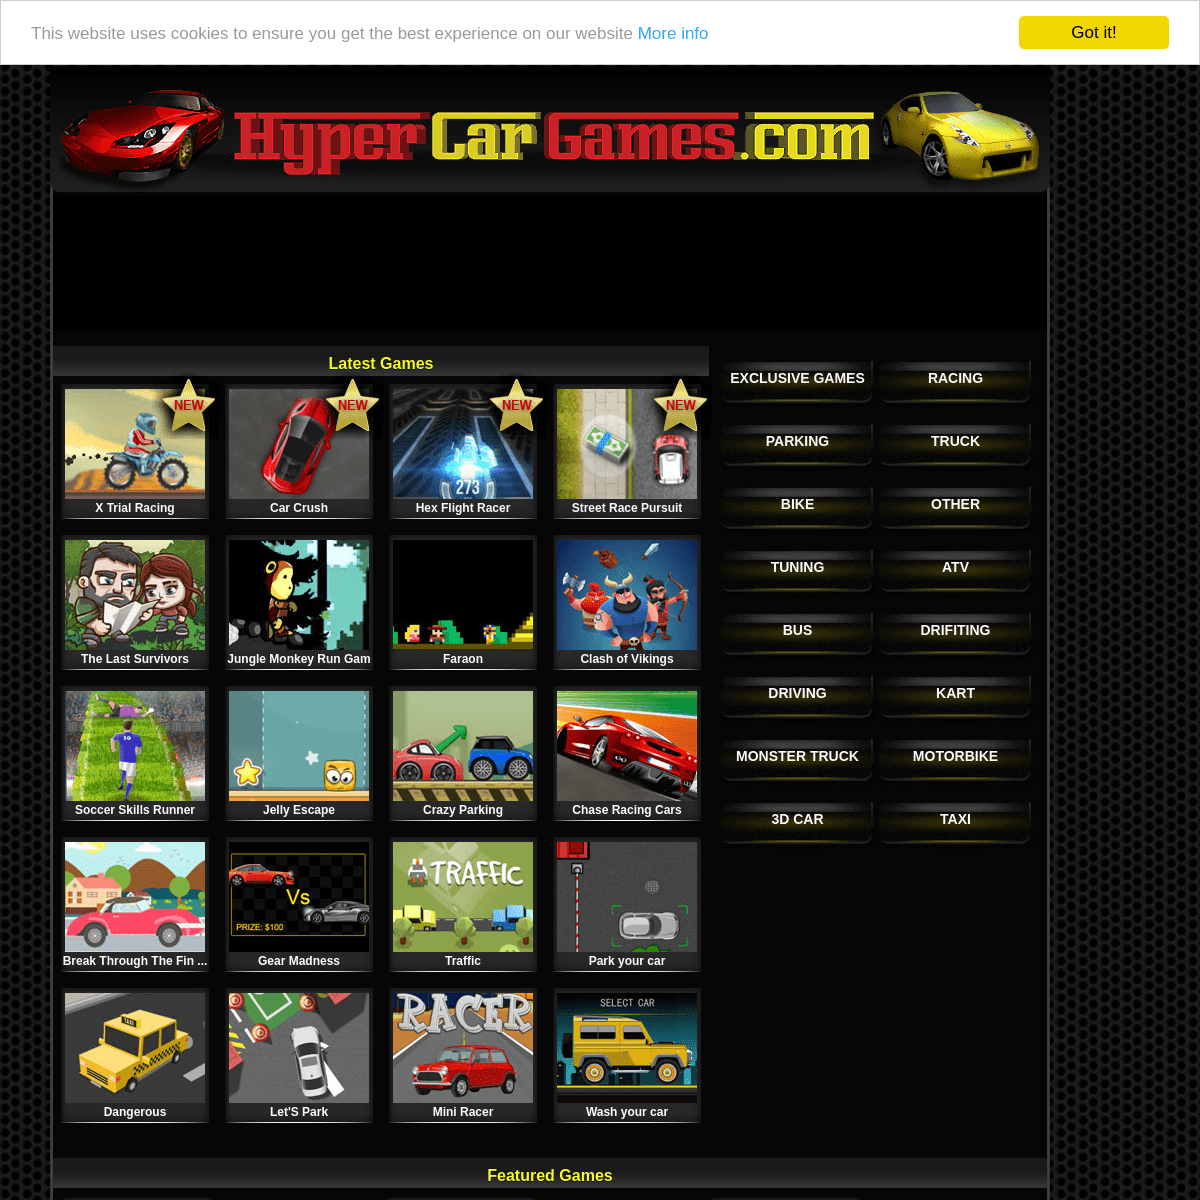 A complete backup of hypercargames.com